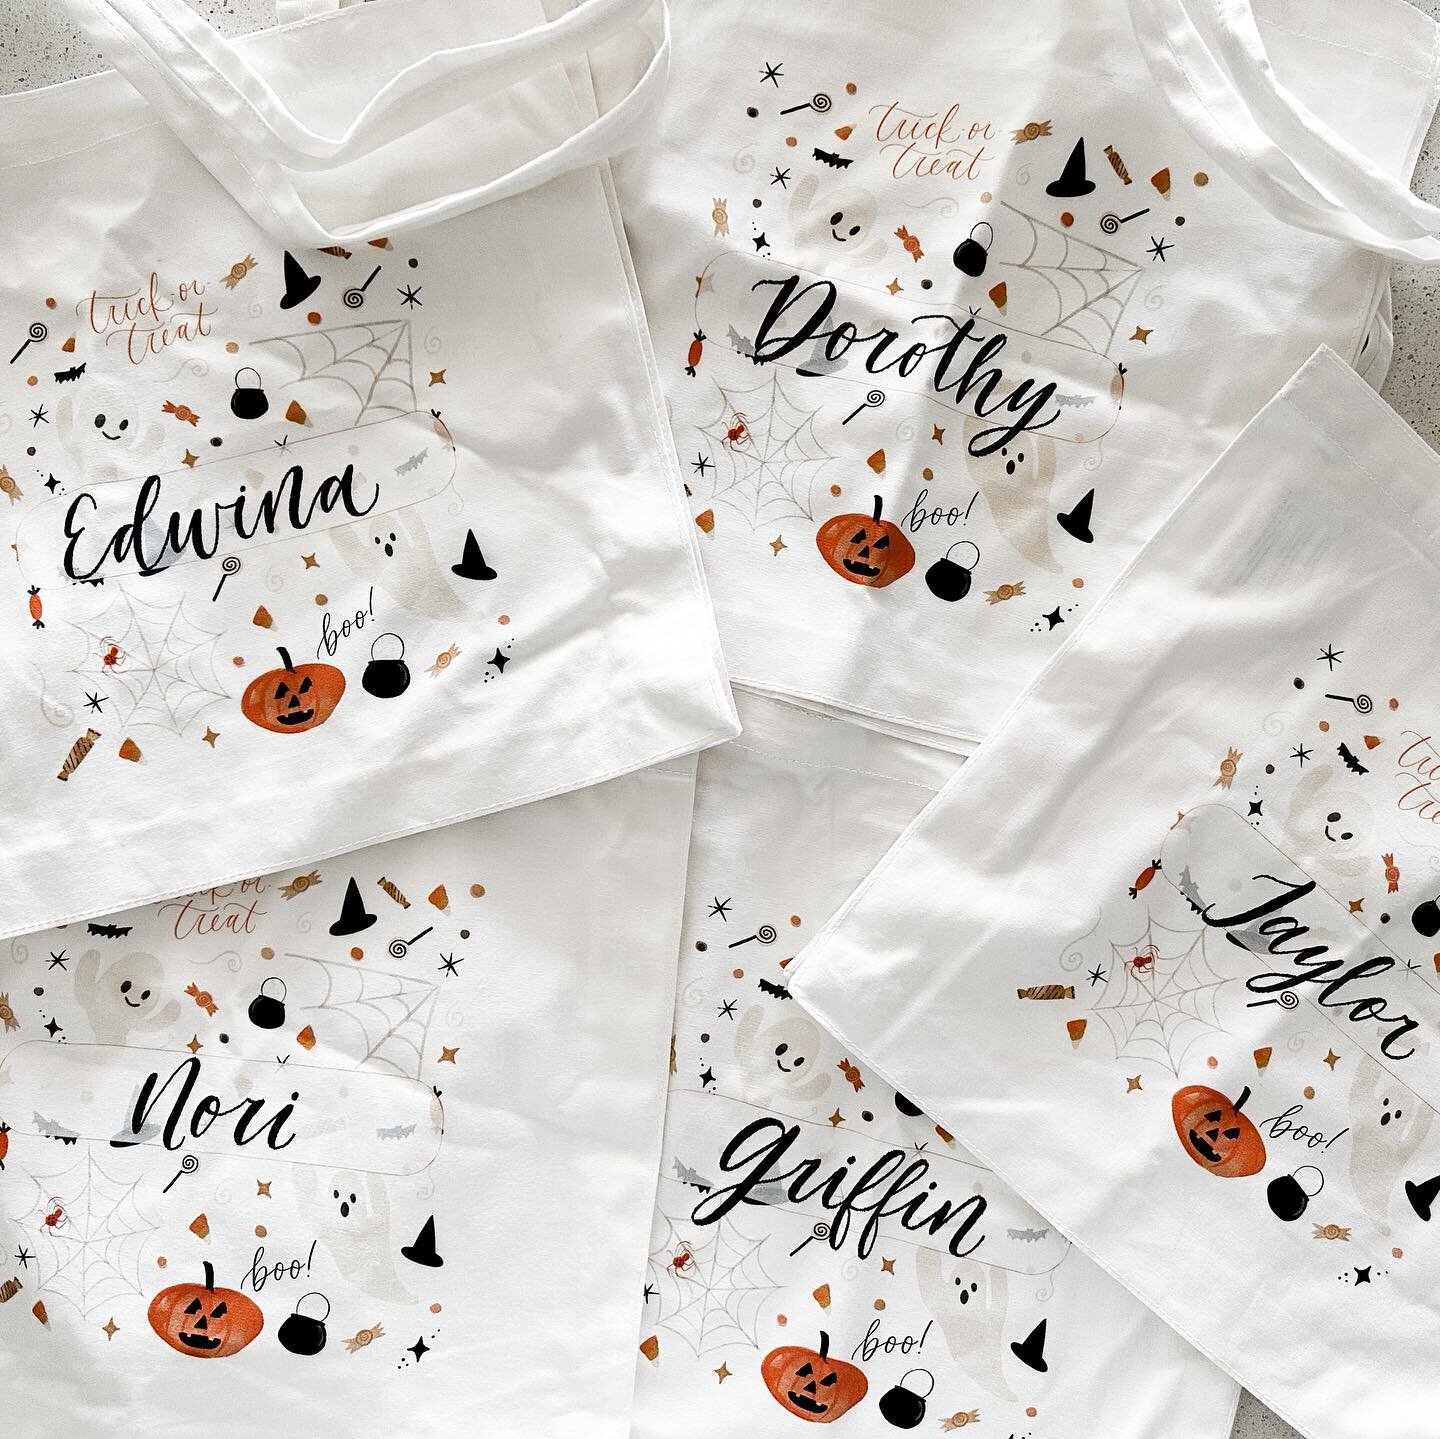 G I V E A W A Y!!!🧡✨

It&rsquo;s been awhile since I did a giveaway so I&rsquo;m so excited for this one! Winner will receive a medium personalized pumpkin &amp; a custom trick or treat bag! 🍭🎃

To Enter:
▪️Follow @graceandmoondesign
▪️Like &amp; 